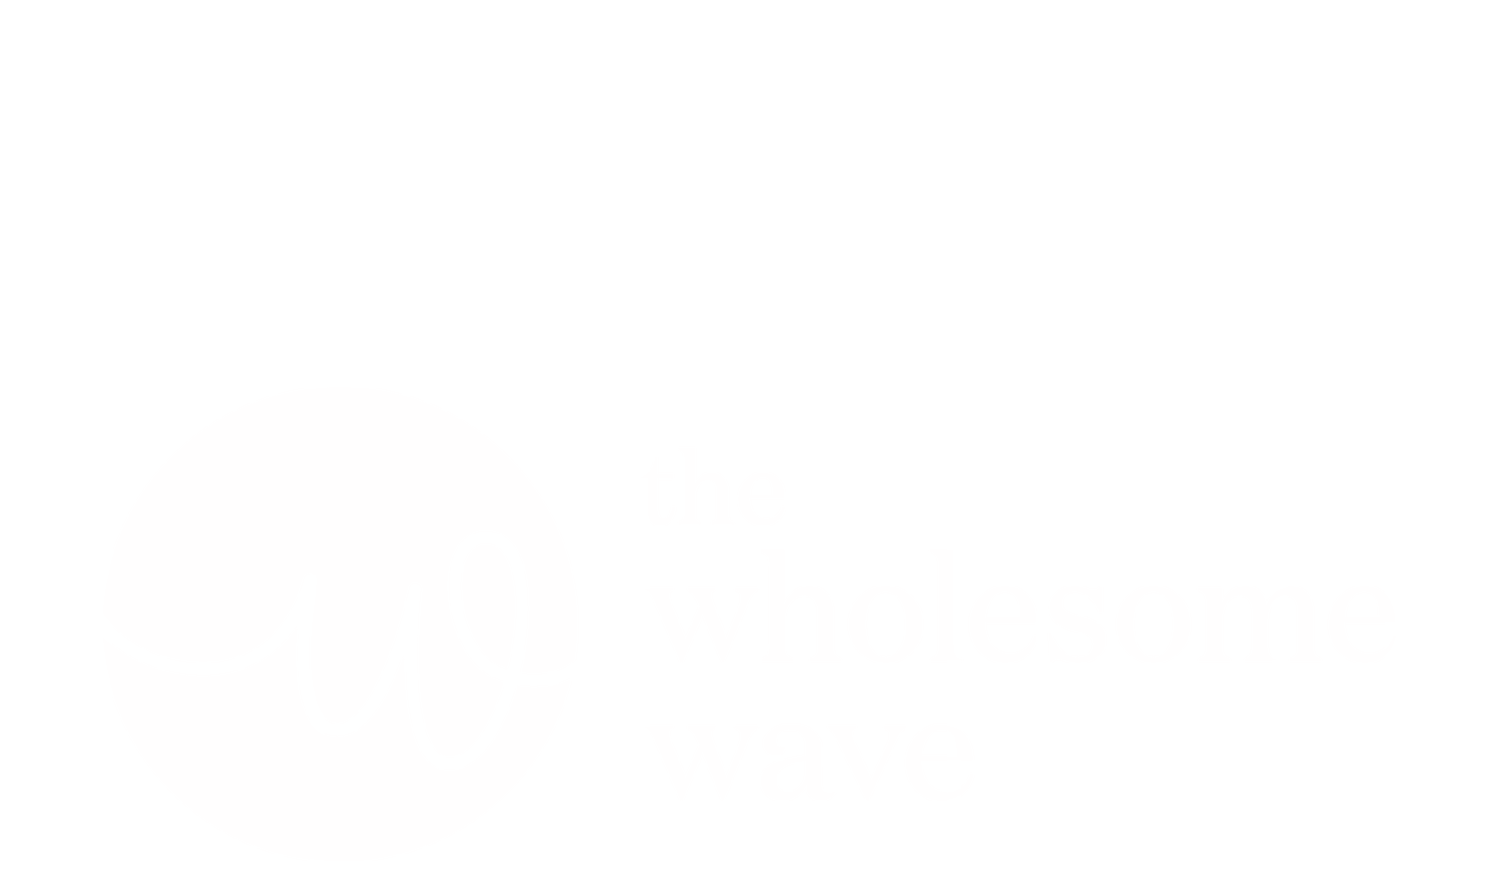 The Wholesome Wave